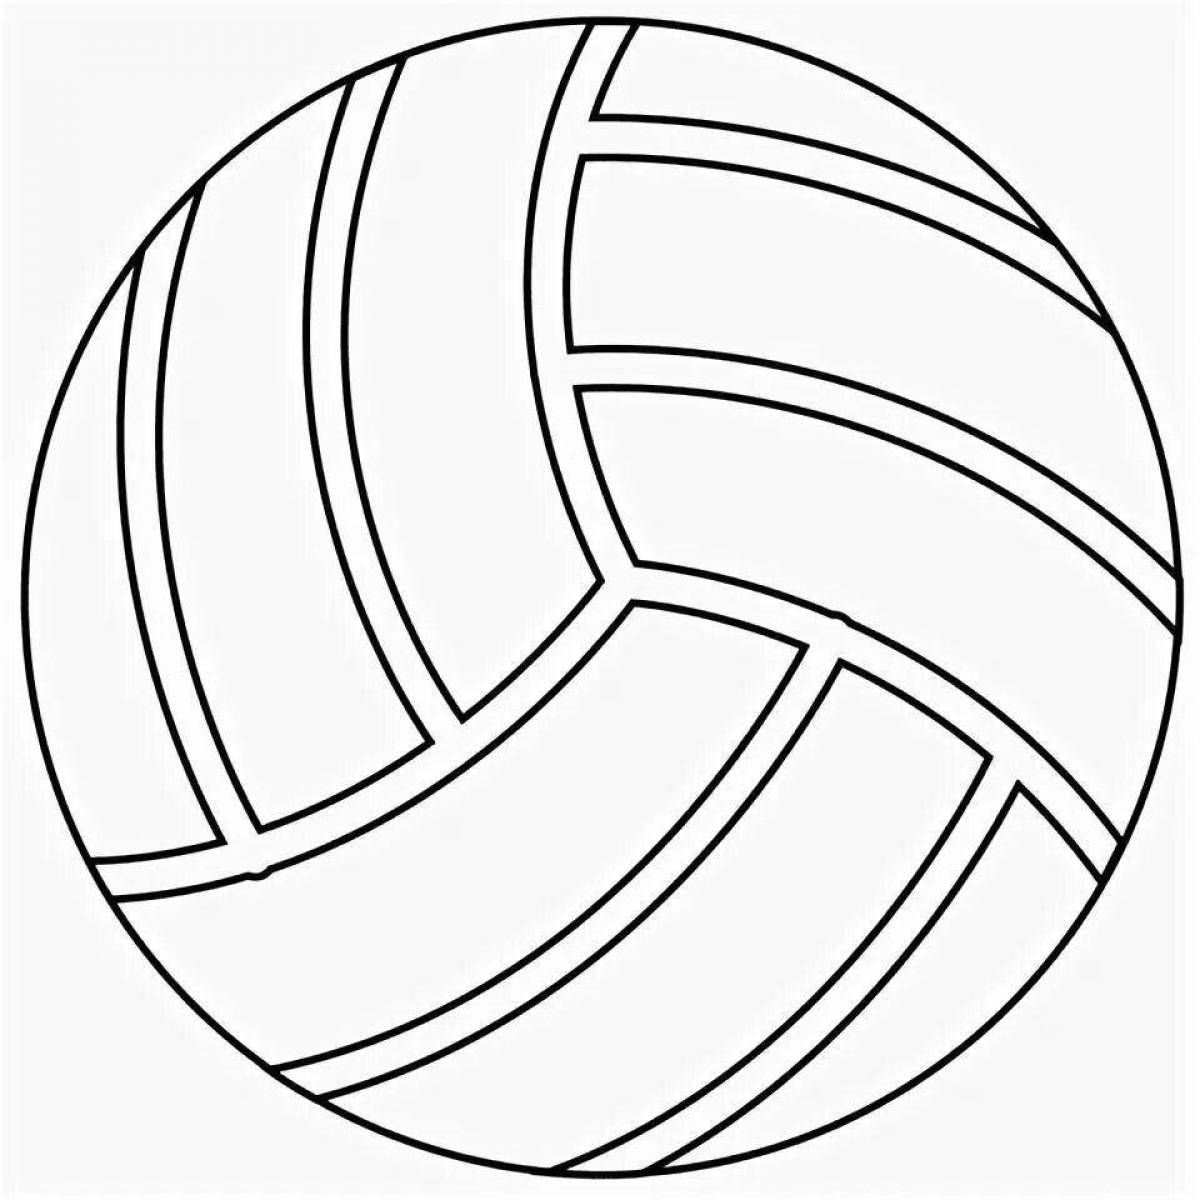 Colorful volleyball coloring book